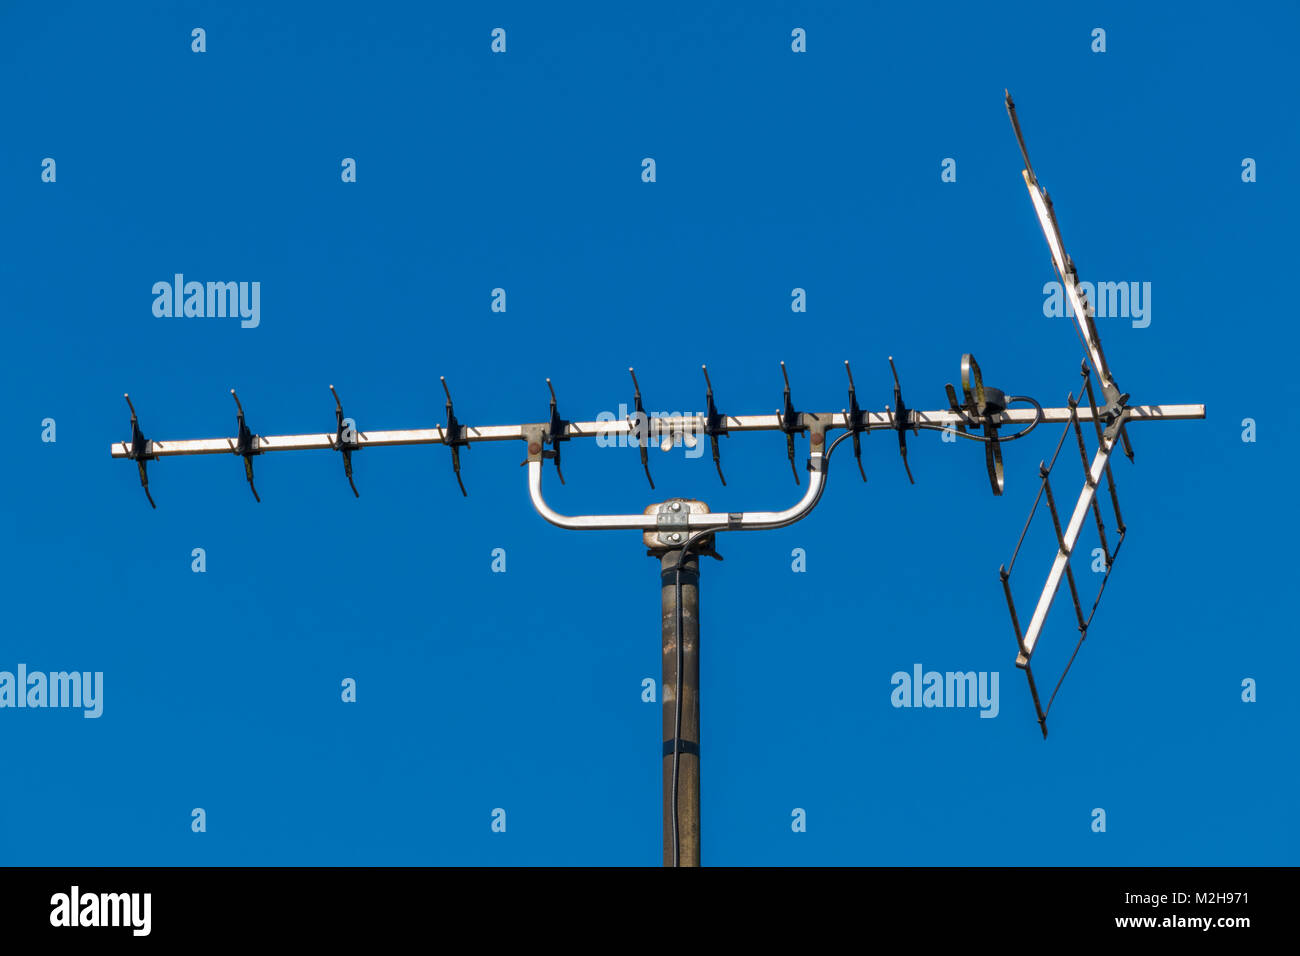 Closeup view of a traditionall roof aerial / antenna for television TV sound and viewing signal, against a blue sky. England, UK. Stock Photo